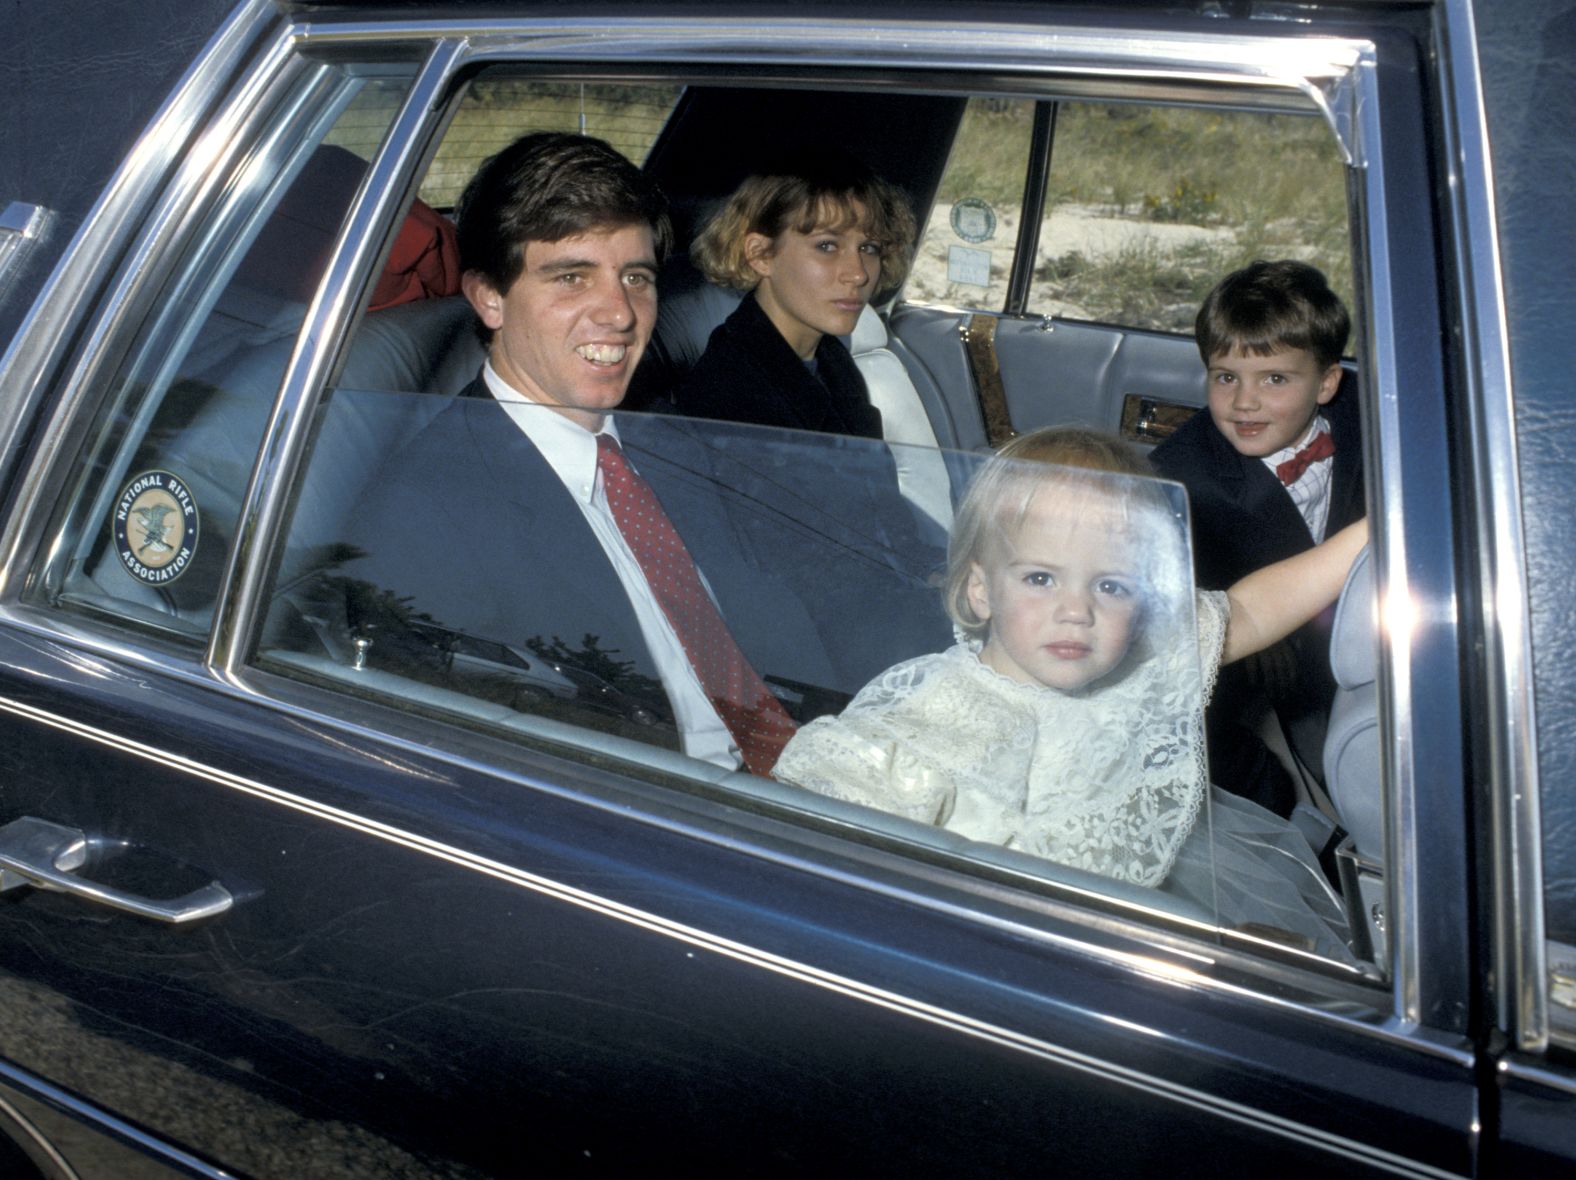 Michael Kennedy, one of RFK's 11 children, died in a skiing accident in Aspen, Colorado, in 1997. The father of three had suffered an onslaught of negative publicity over an alleged affair with a family babysitter.